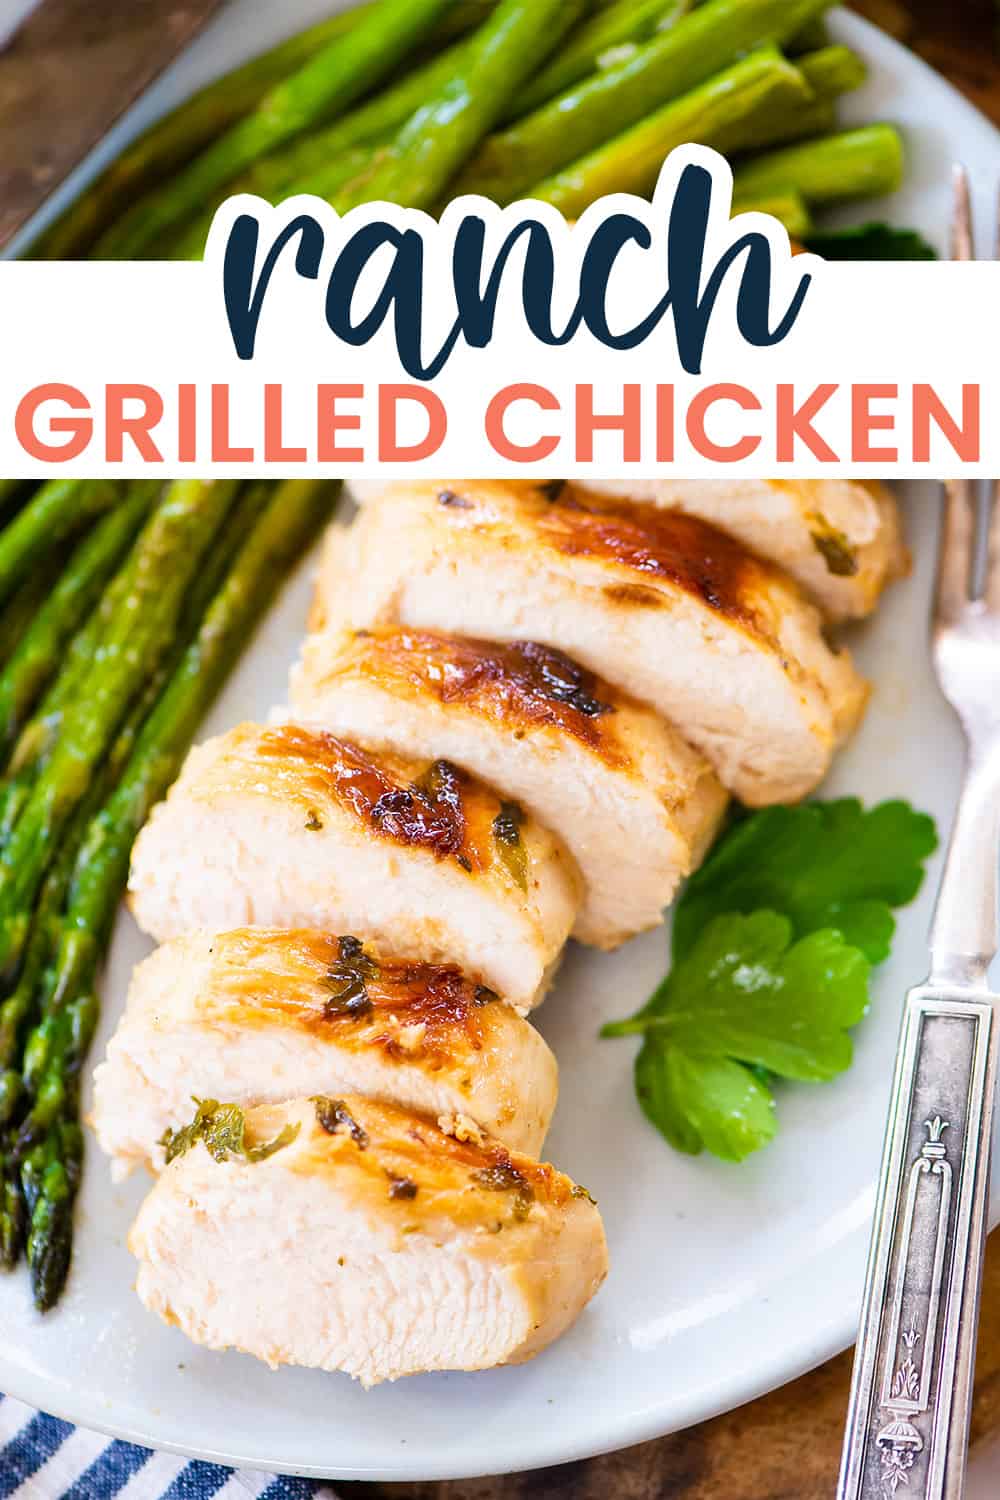 Ranch grilled chicken sliced on a plate.